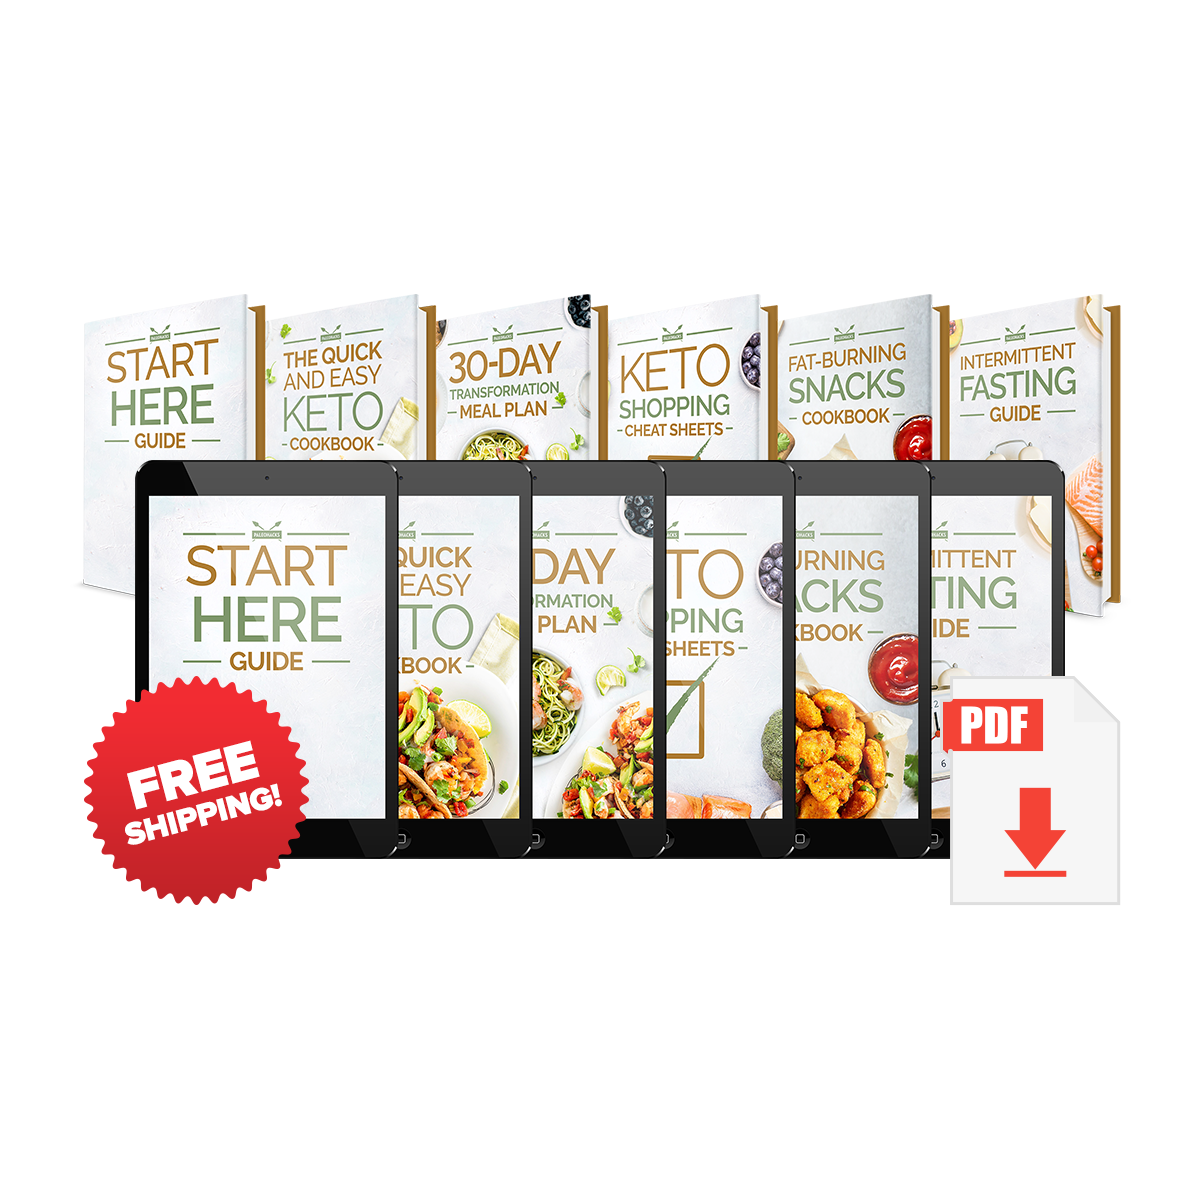 A collection of Keto fat loss Accelerator books. Free shipping badge and PDF signage can be seen.